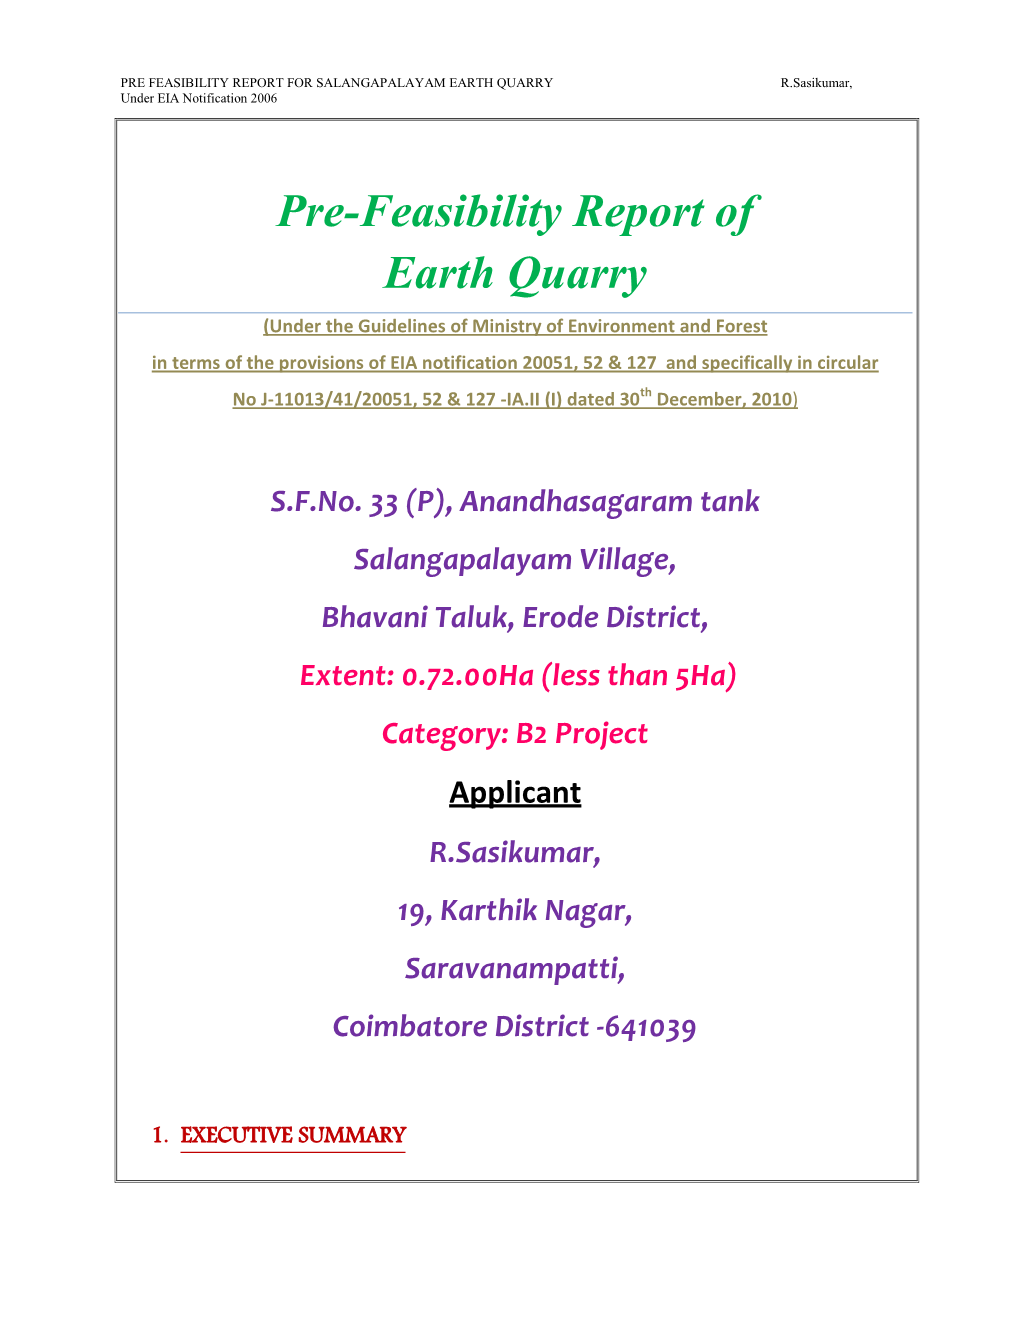 Pre-Feasibility Report of Earth Quarry